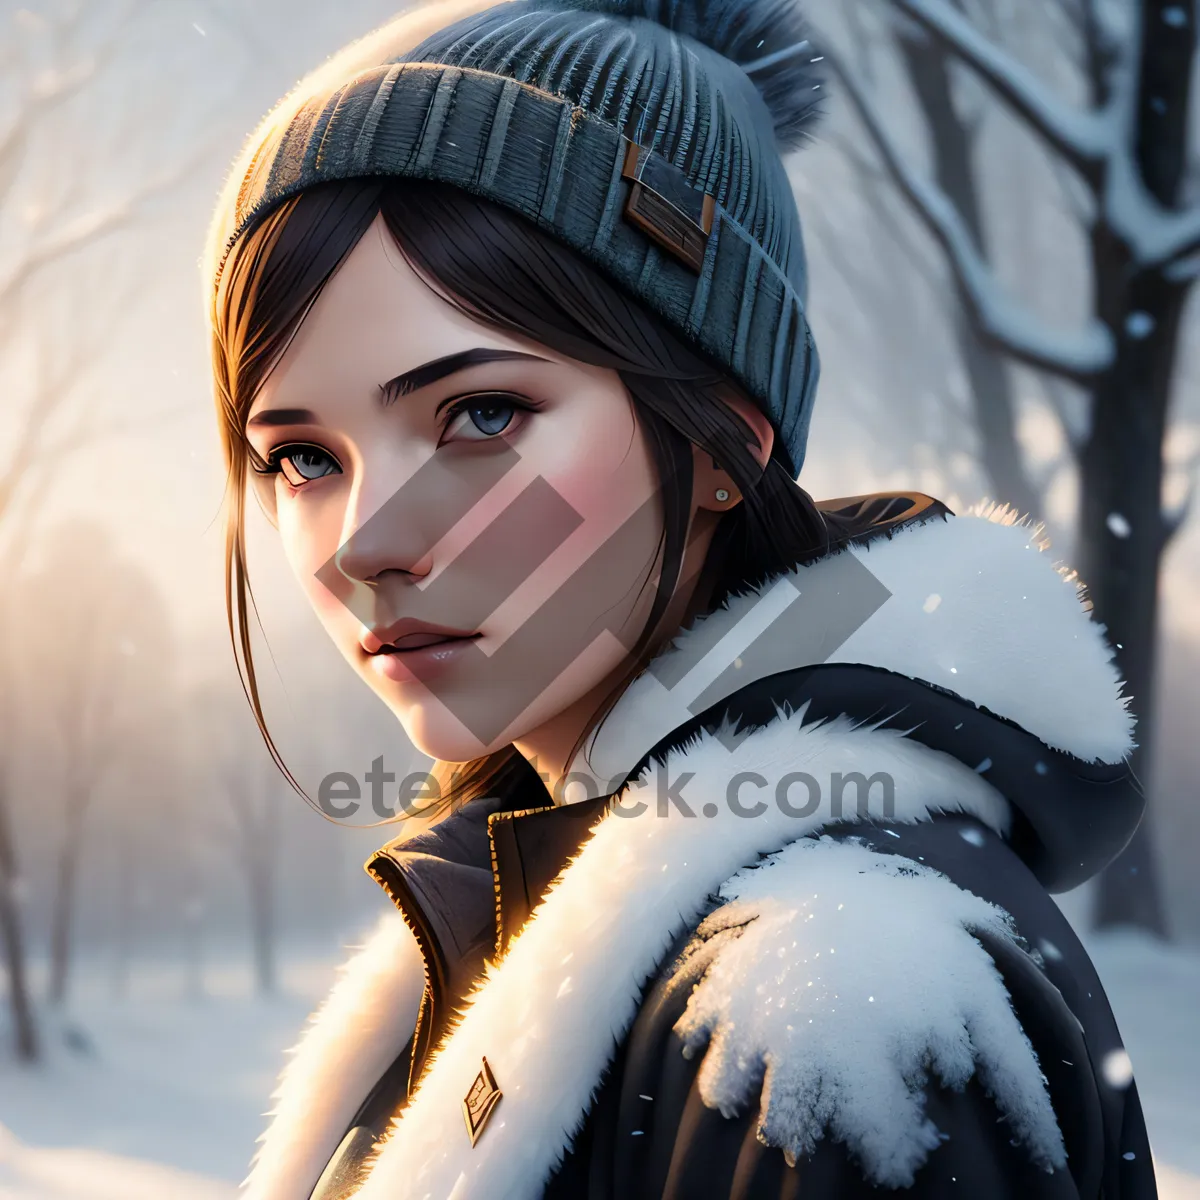 Picture of Winter Charm: Attractive Snow Model Braving the Cold